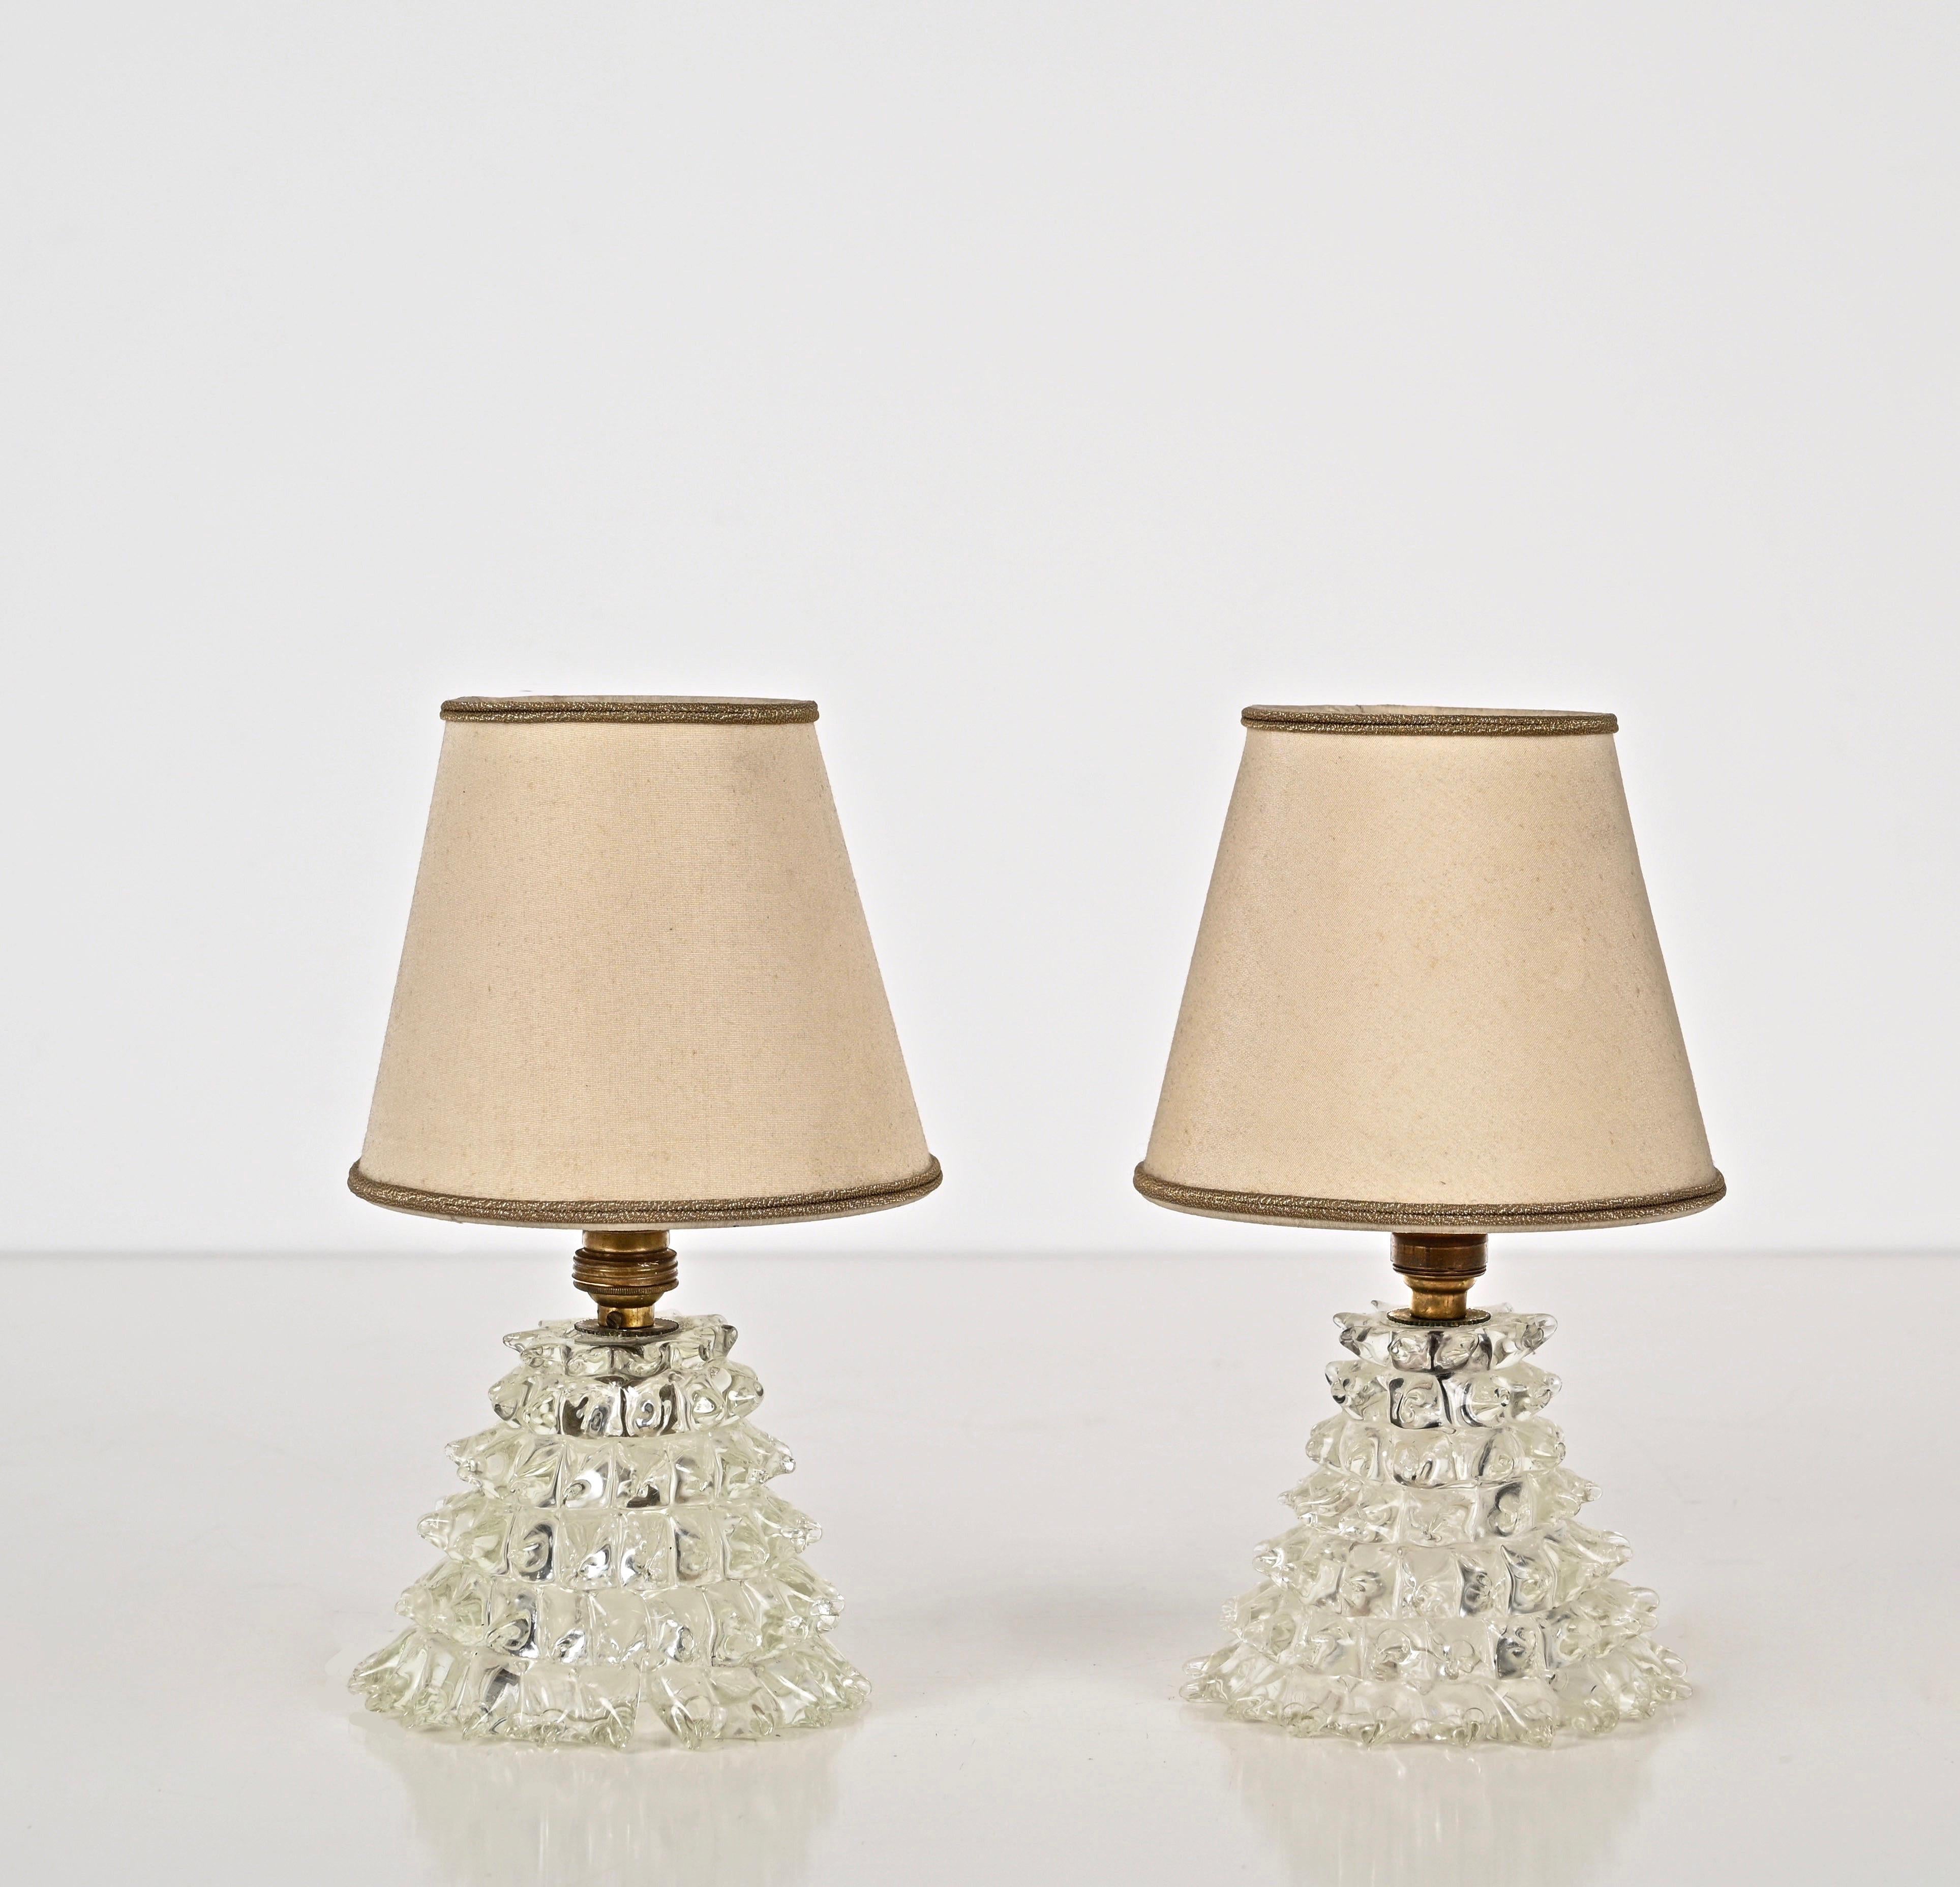 Pair of Barovier Murano Rostrato Glass and Brass Table Lamps, Italy 1950s For Sale 6